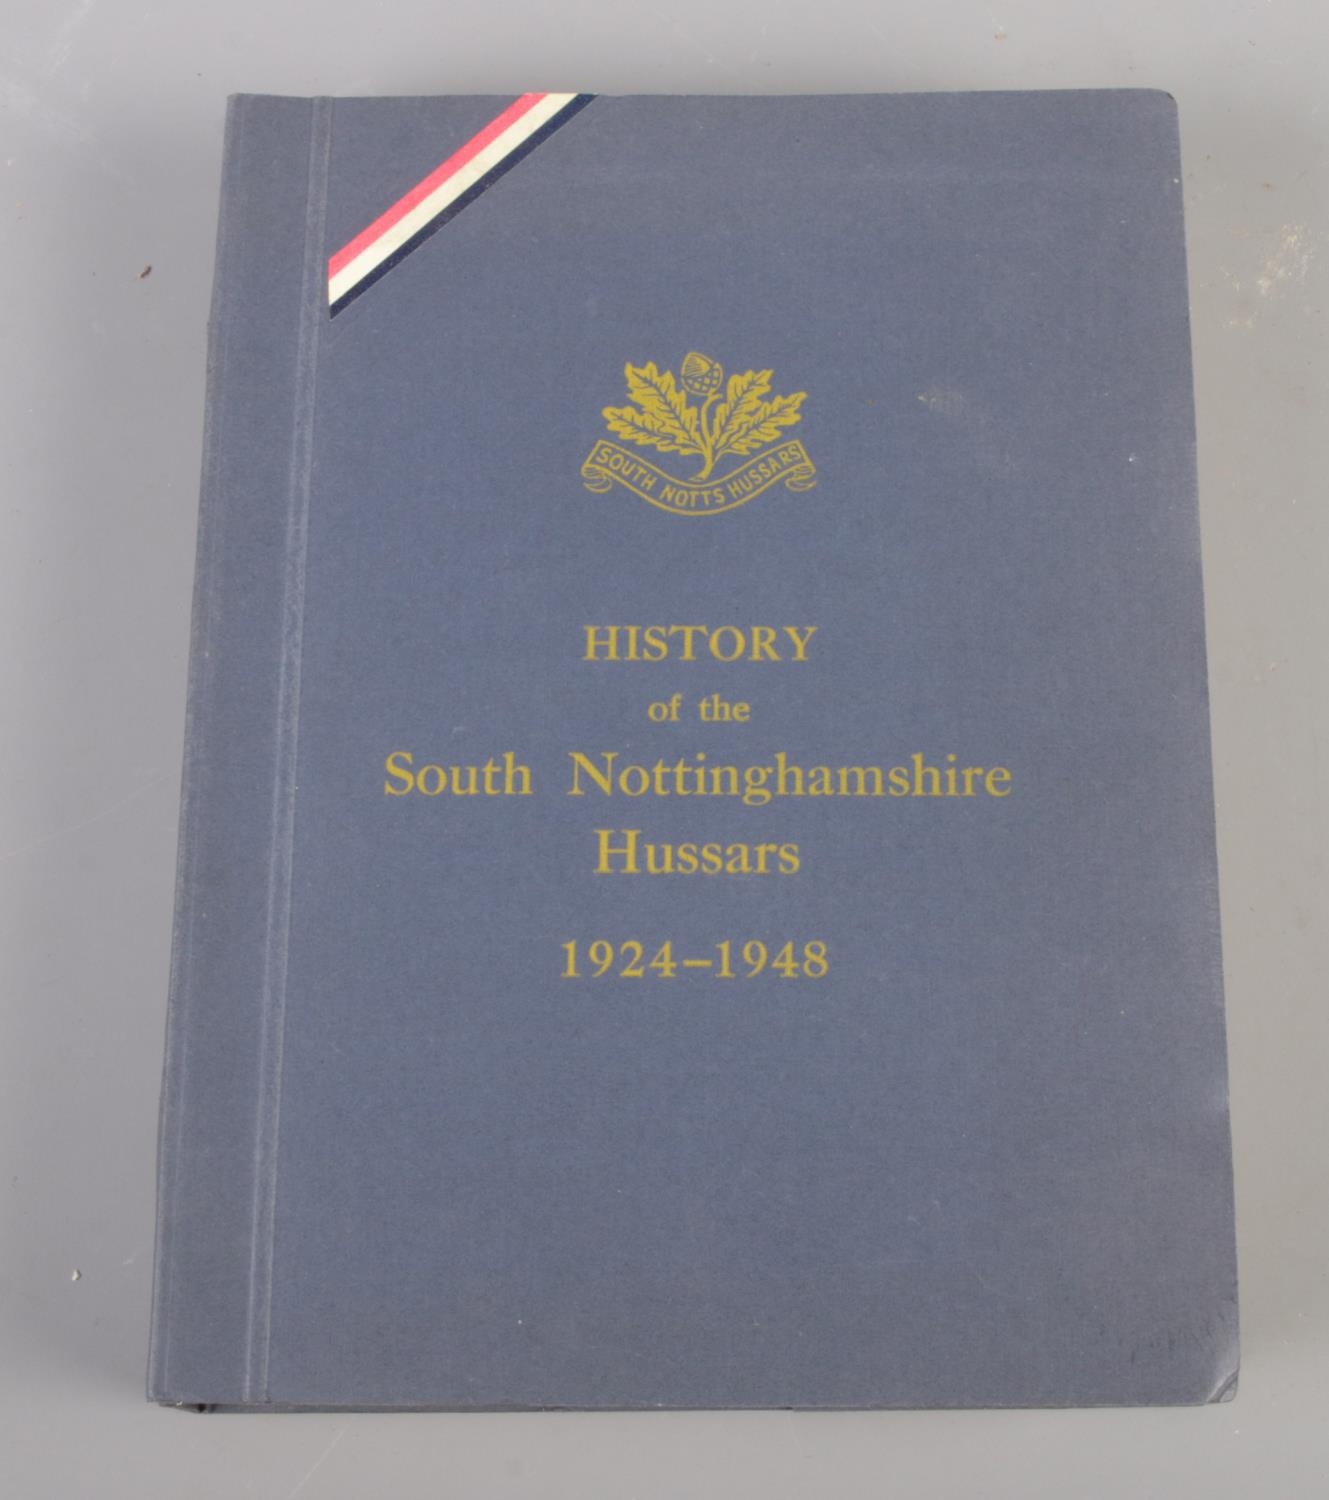 One volume of the History of the South Nottinghamshire Hussars, 1924 - 1948